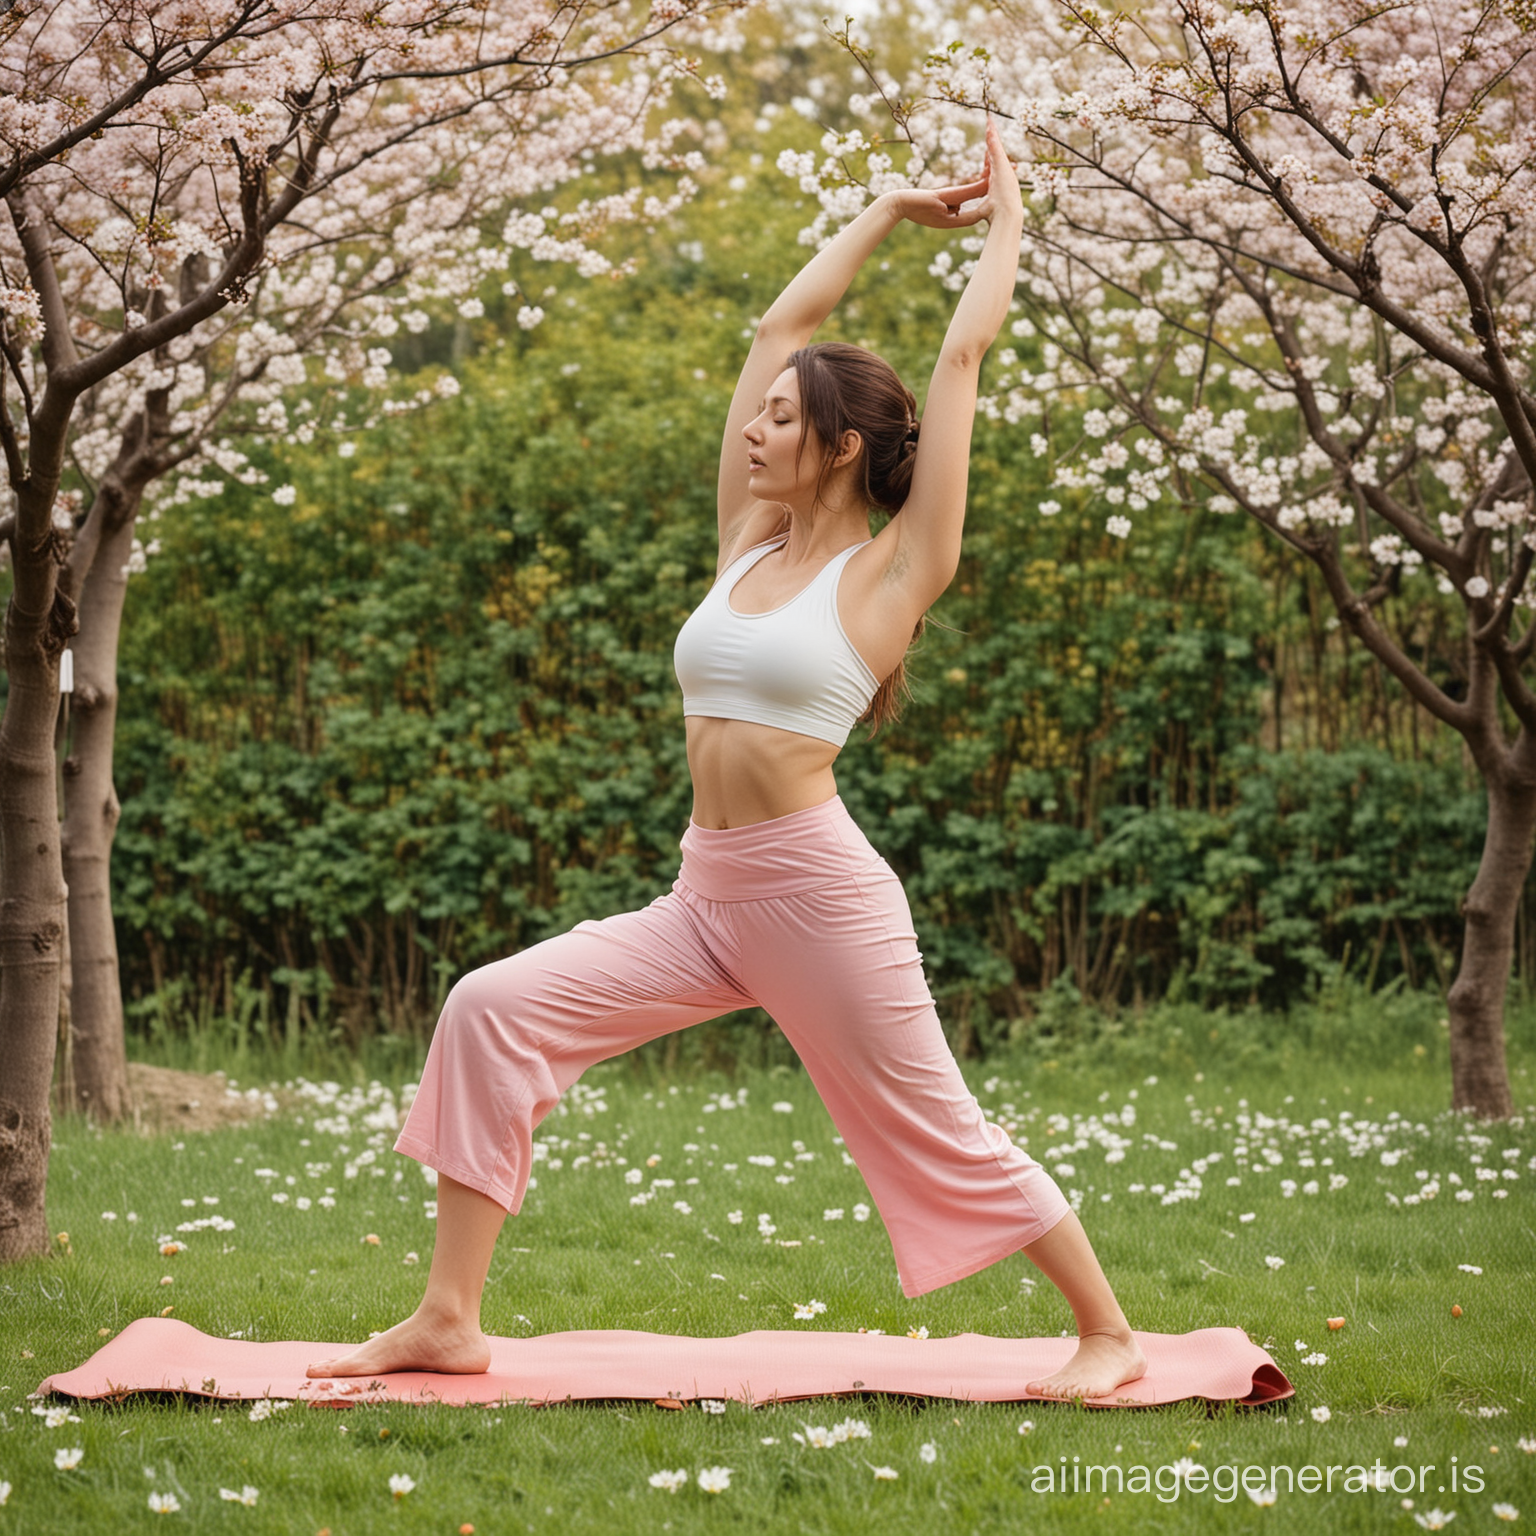 Lovely twenty four Years old woman does standing yoga at her cute garden full of flowers and Japan cherry trees